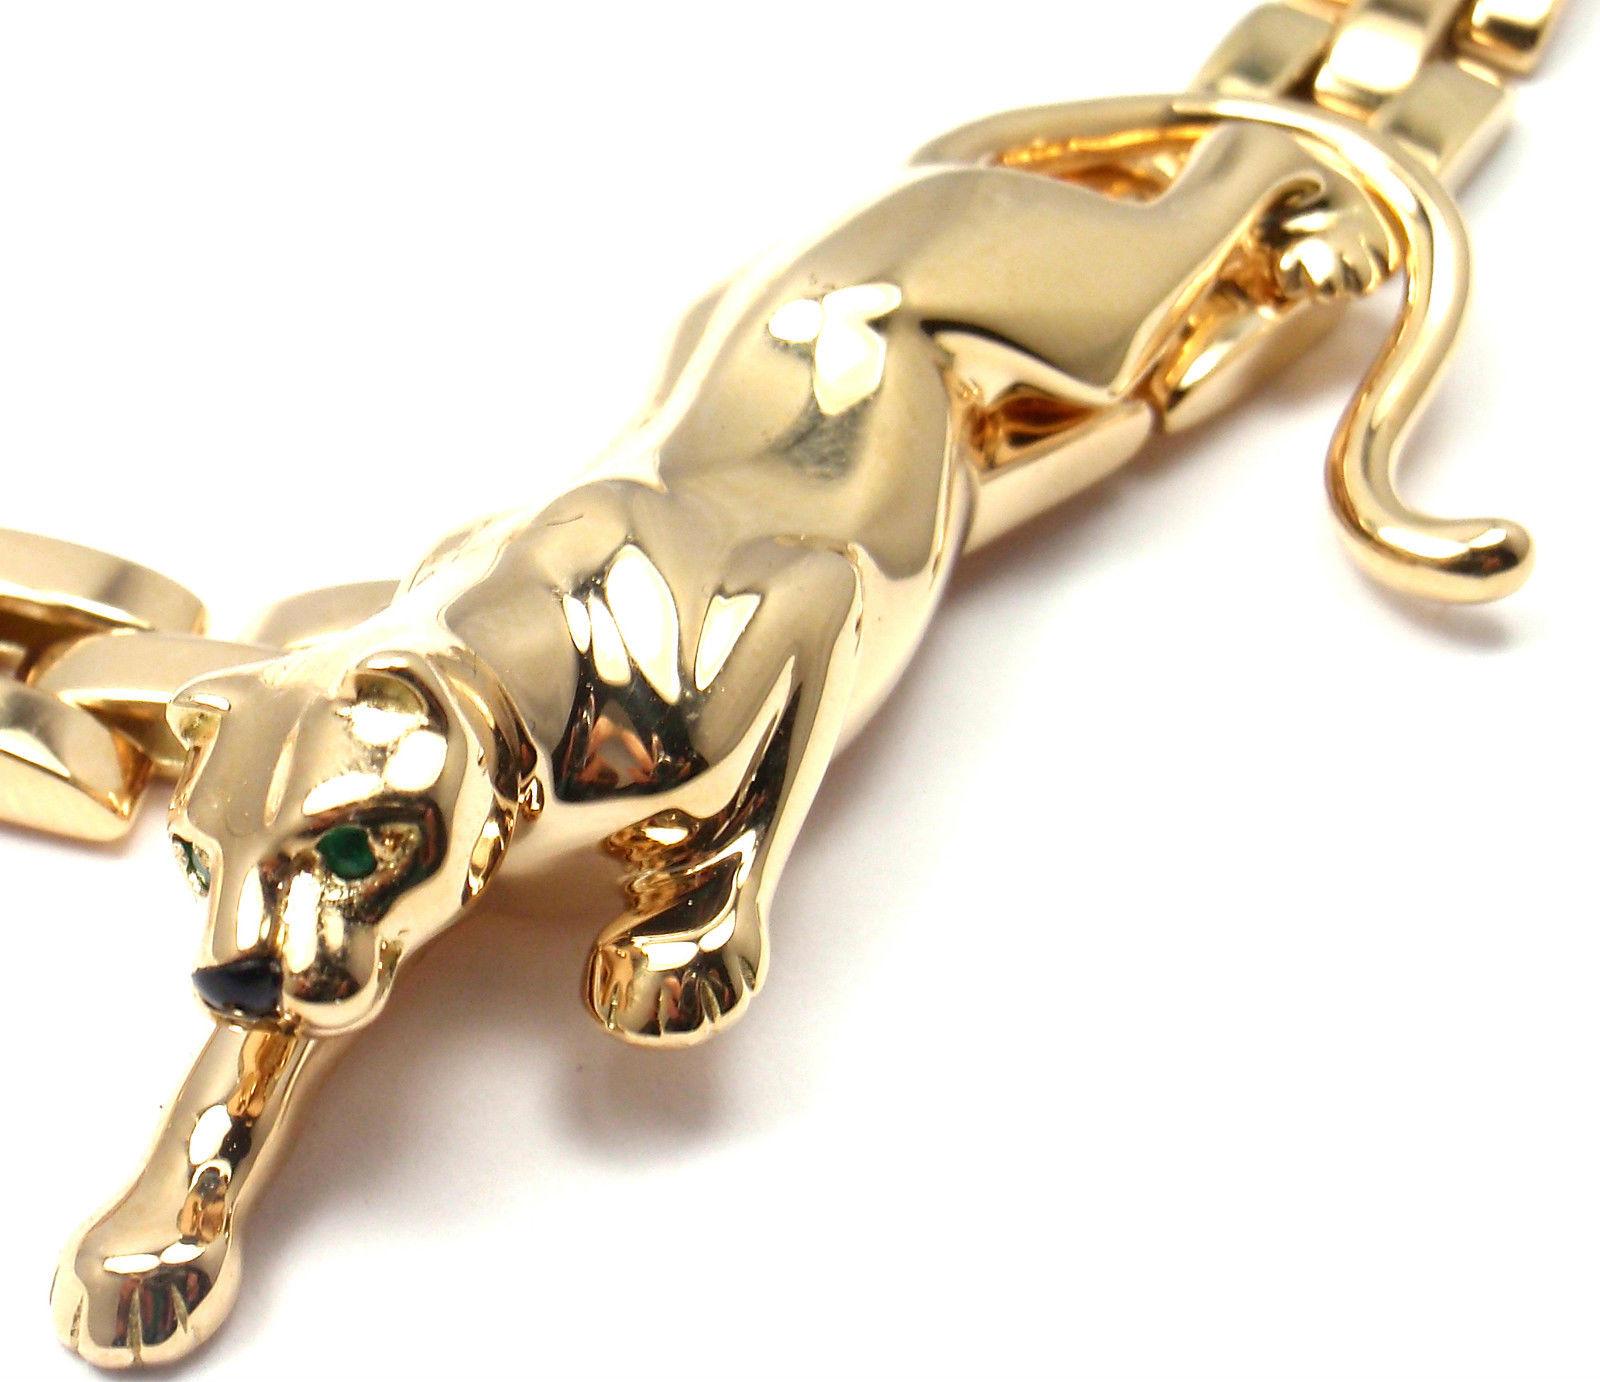 18K Yellow Gold Panthere Panther 3 Row Maillon Necklace by Cartier.  
With an adorable Panther with black onyx nose and 
2 cute green emerald eyes.  
This necklace comes with its original Cartier box.  
Panther Details:  Length: 2